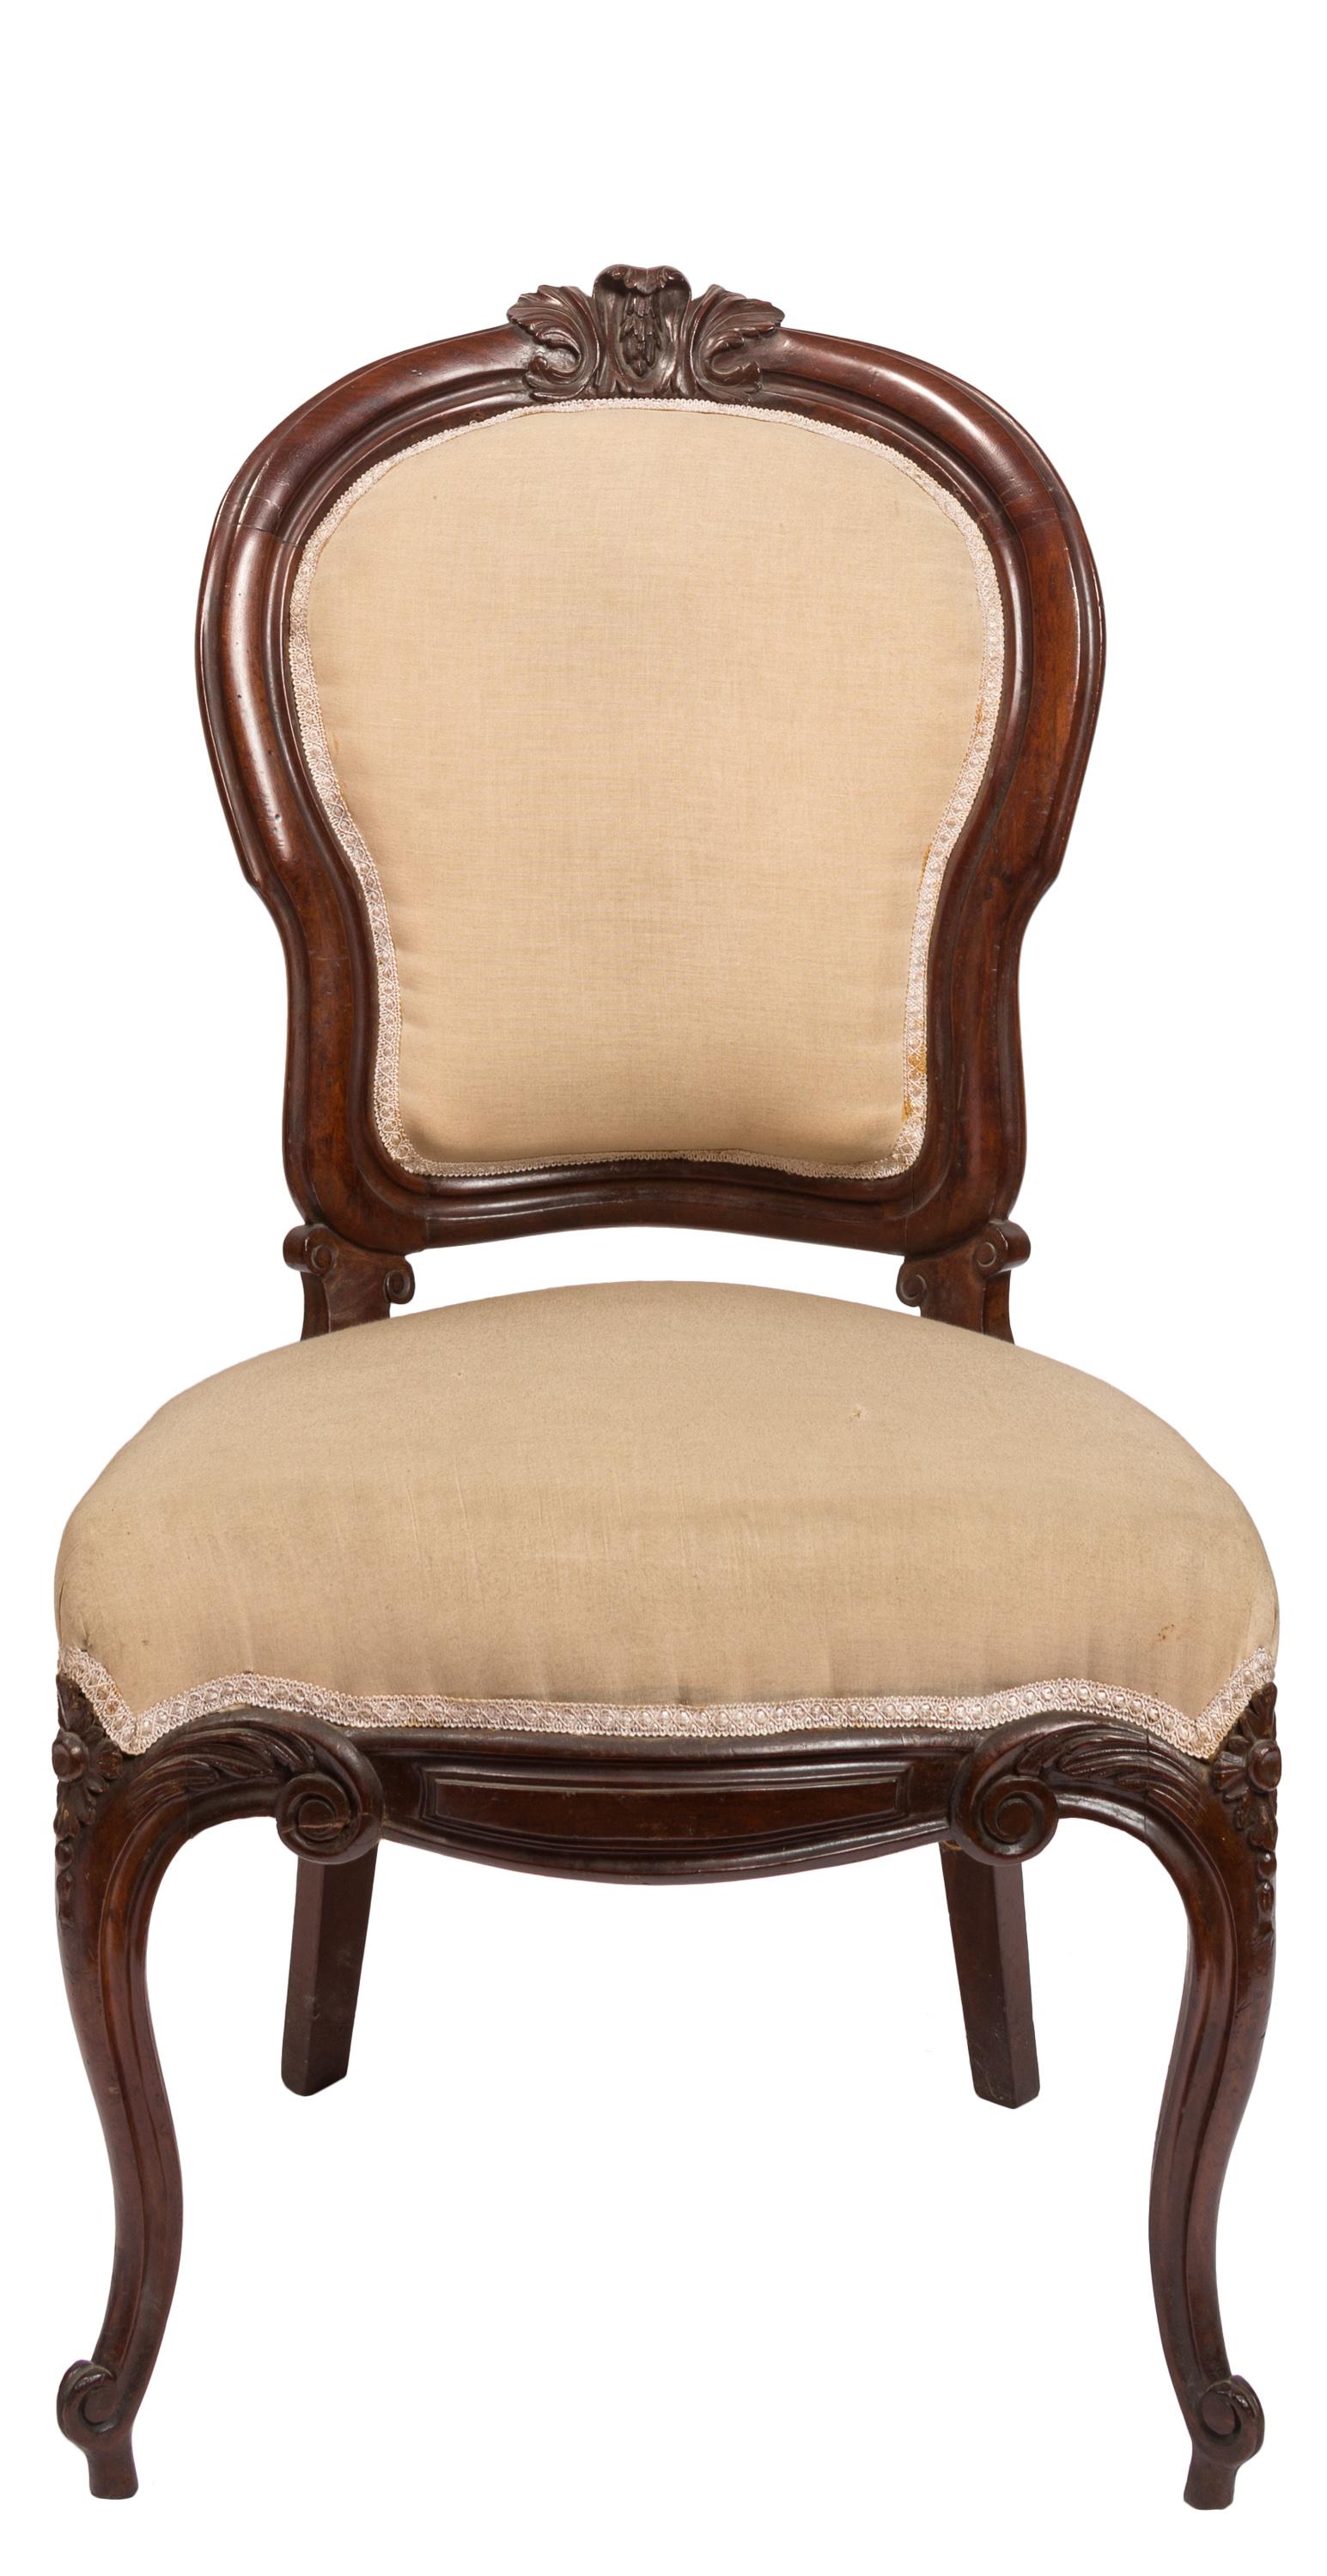 Set of Six Upholstered, Carved Spanish Isabelina / Victorian Period Side Chairs For Sale 4